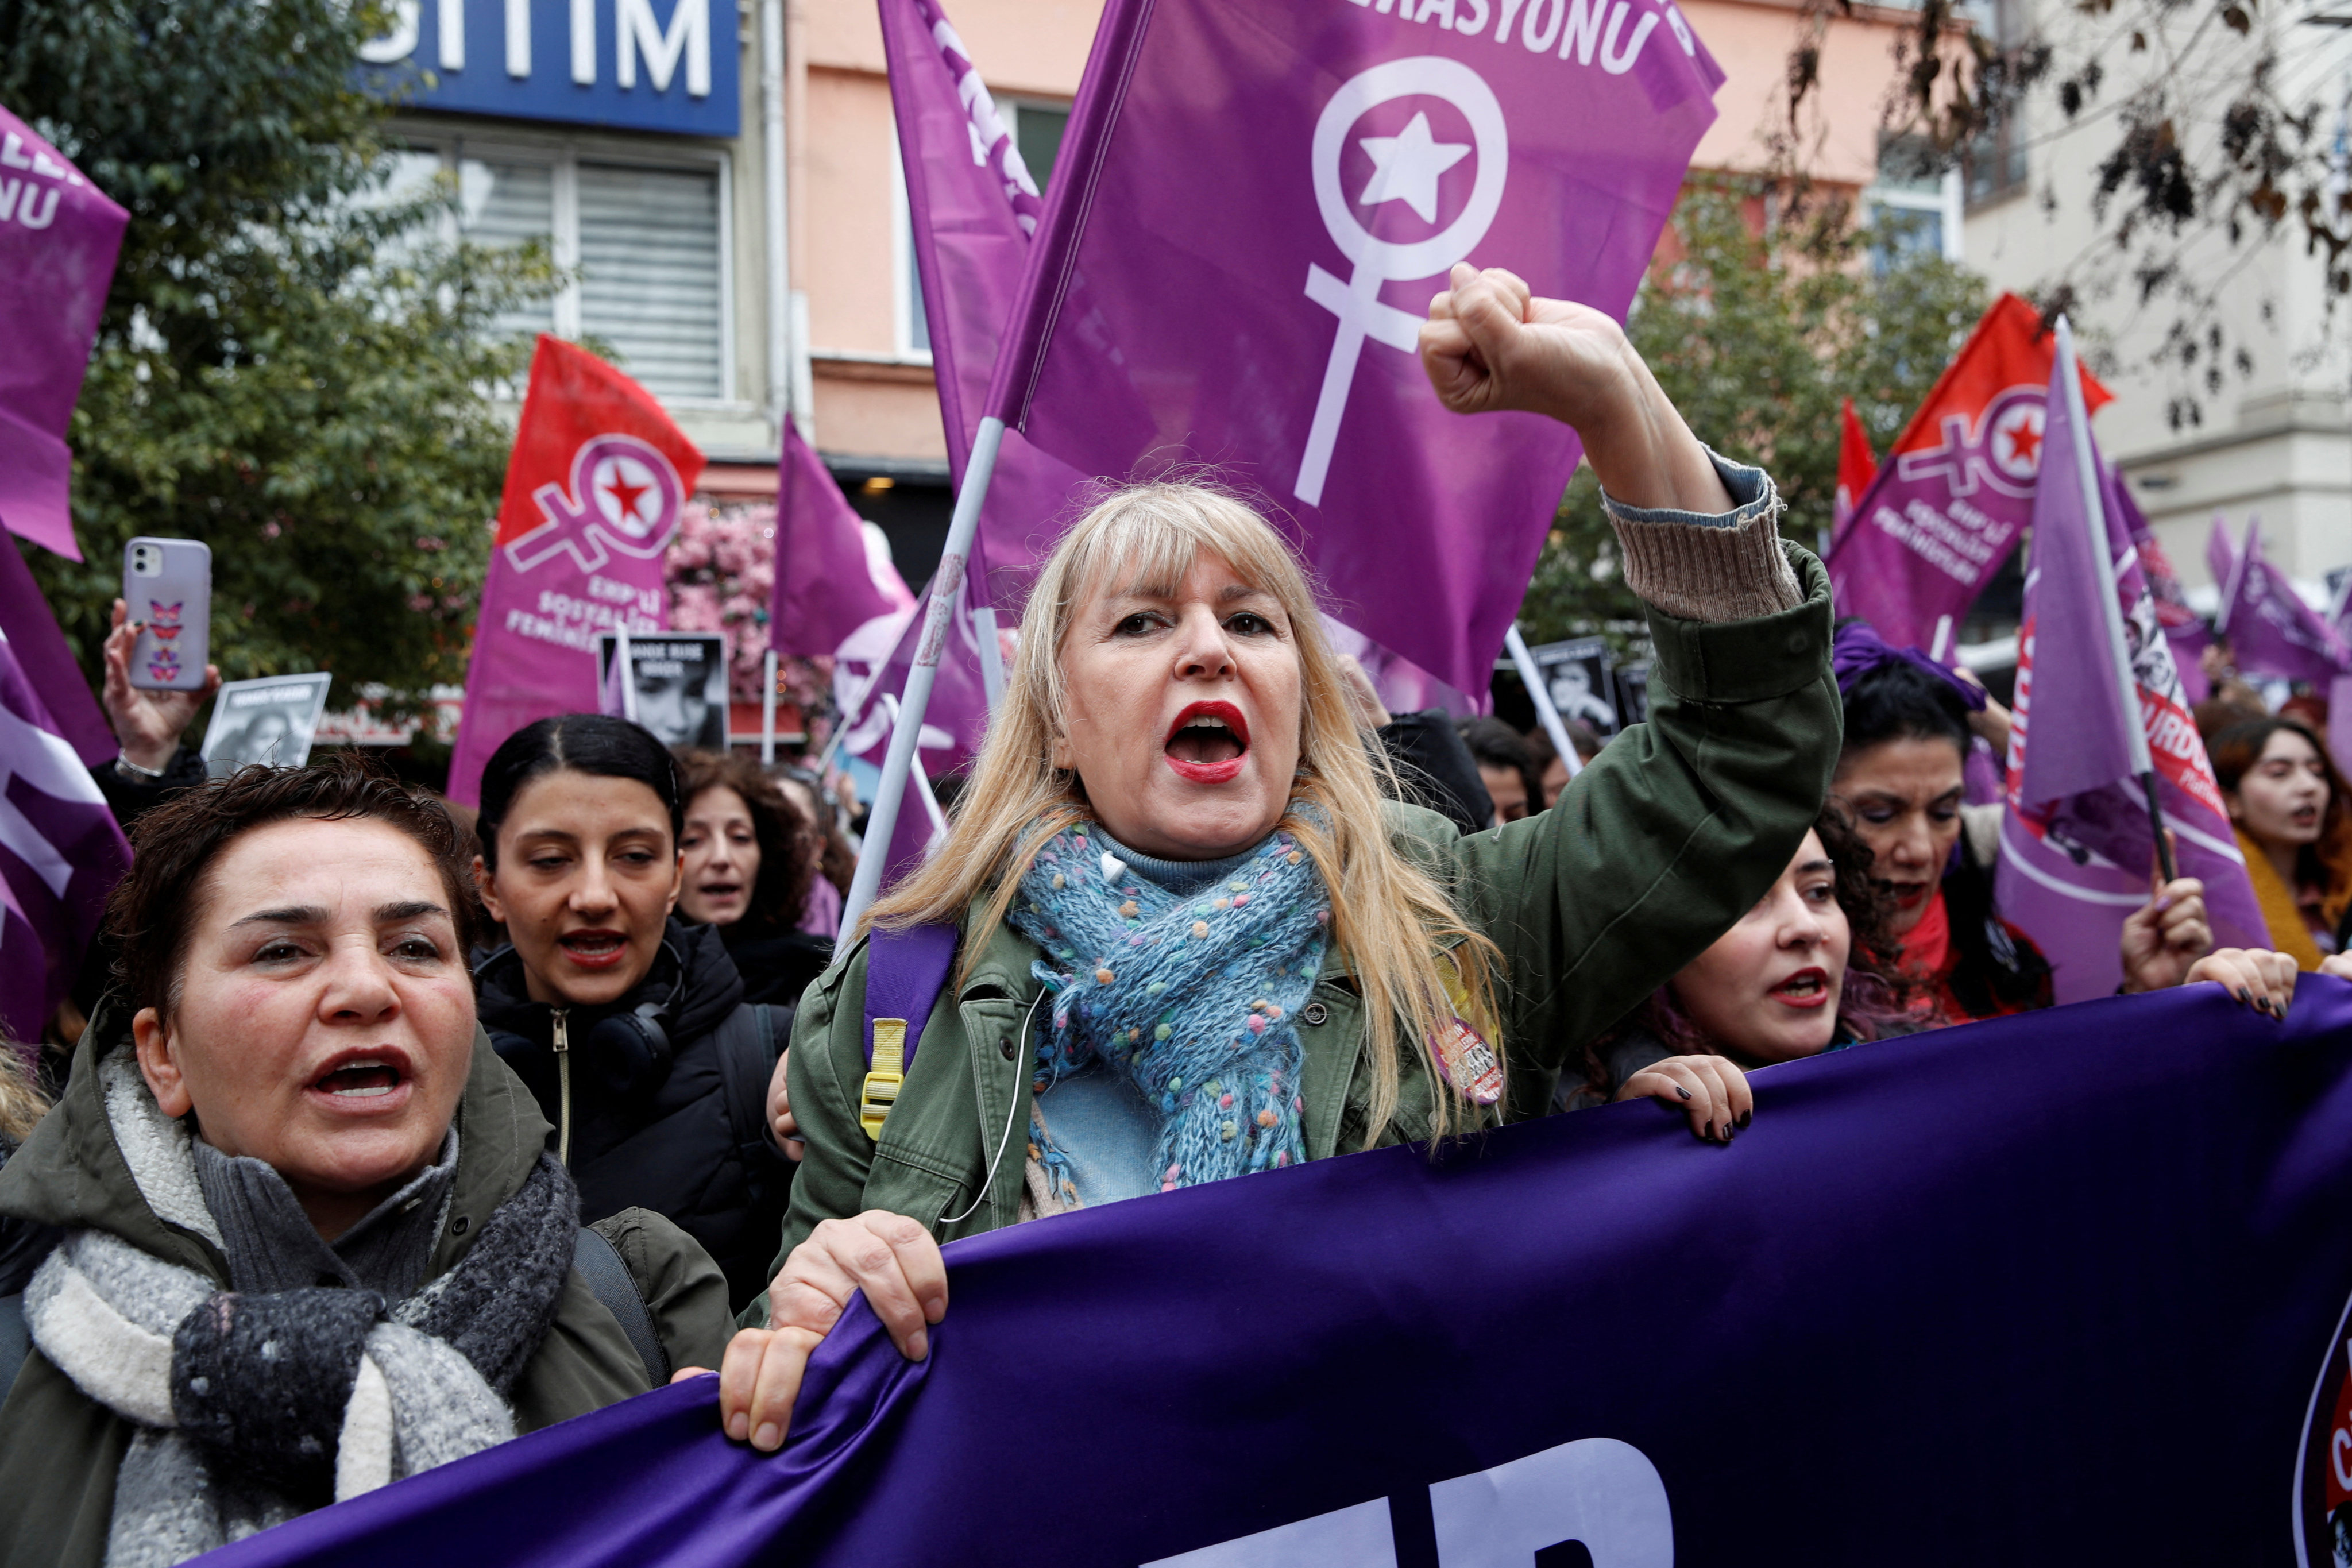 People protest against gender-based violence and femicide ahead of International Women’s Day, in Istanbul on March 3. Photo: Reuters